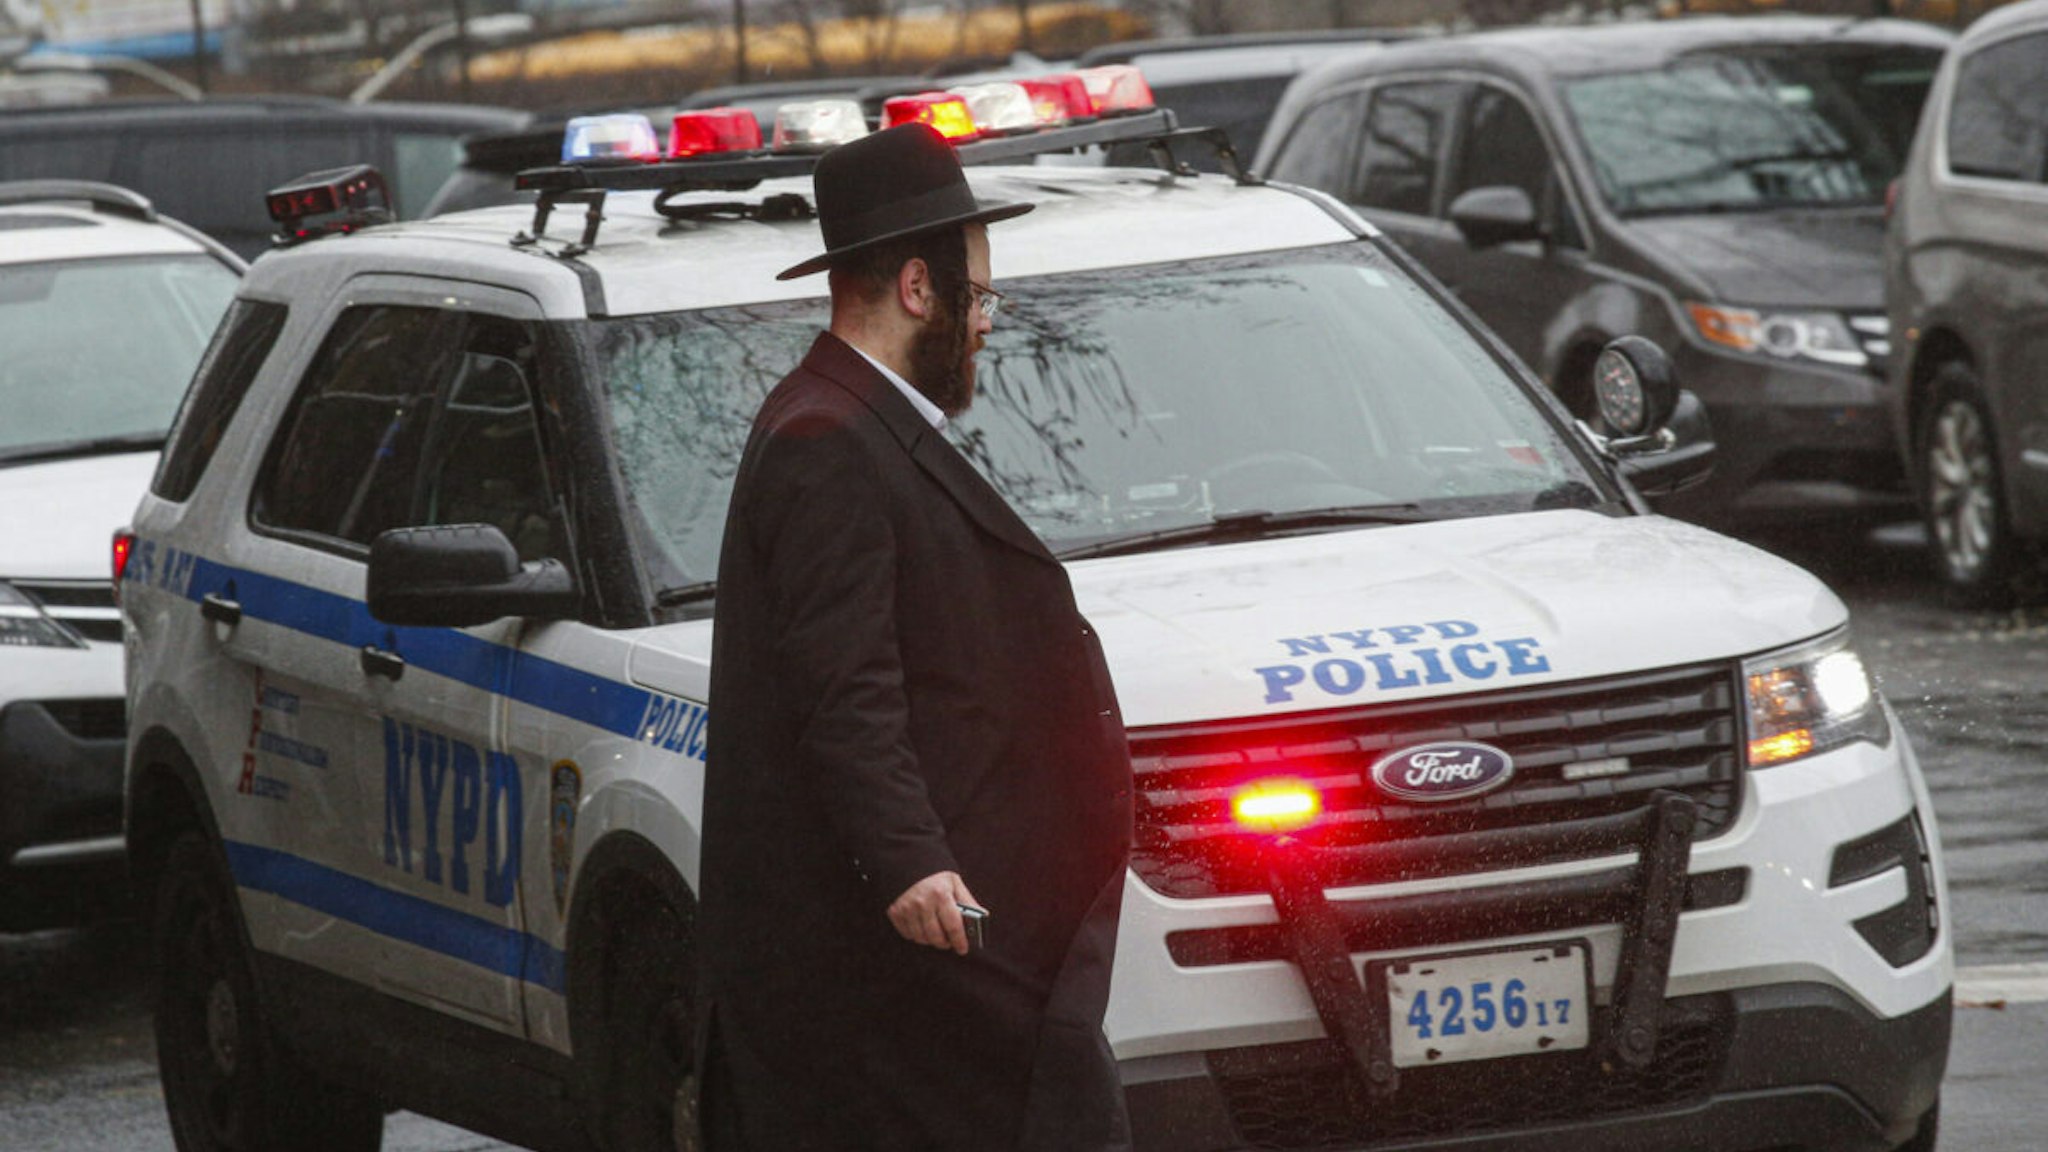 A NYPD car patrols in South Williamsburg Brooklyn on December 30, 2019 in New York City, two days after an intruder wounded five people at a rabbi's house in Monsey, New York during a gathering to celebrate the Jewish festival of Hanukkah.